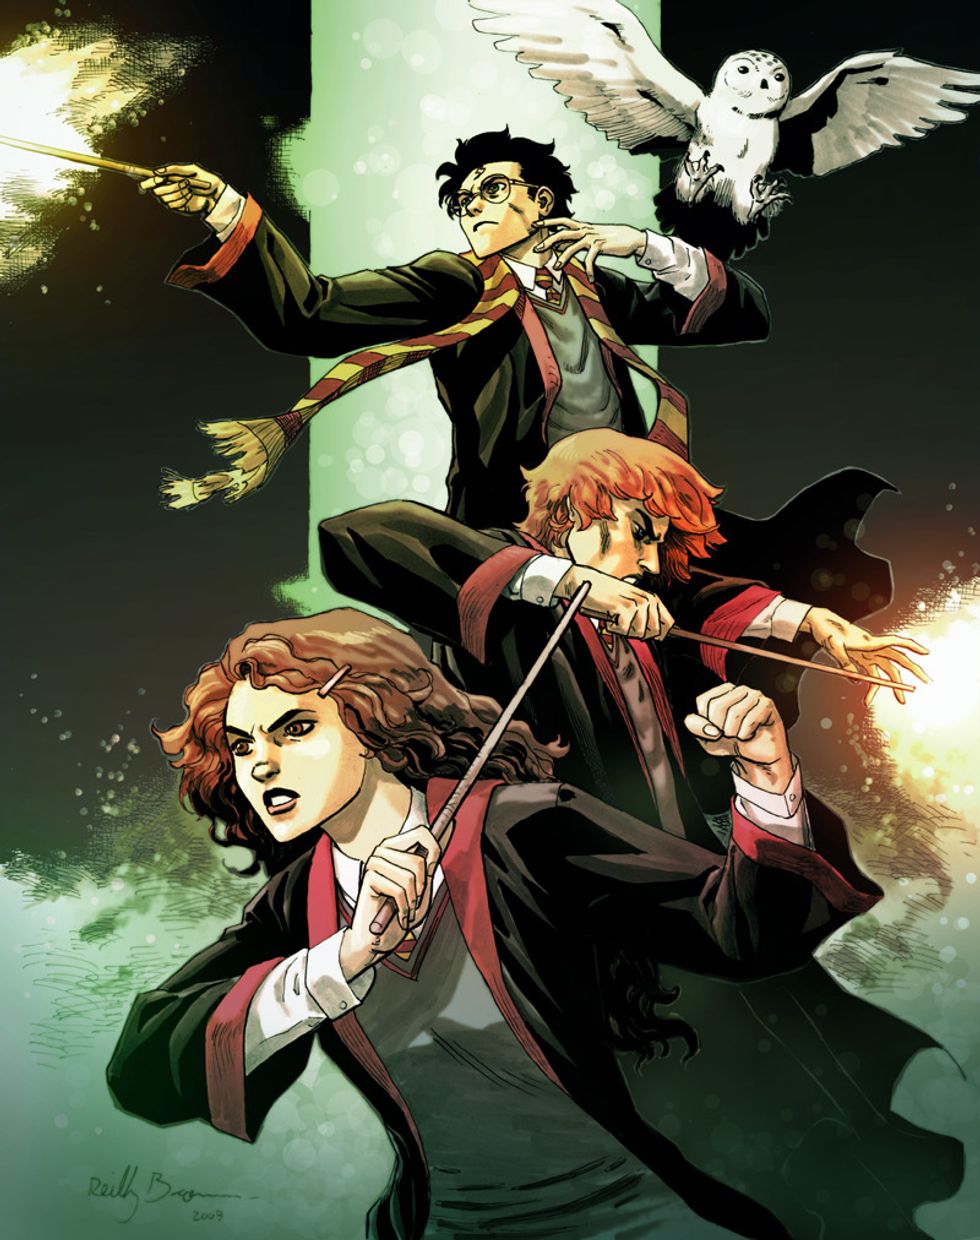 https://upload.wikimedia.org/wikipedia/commons/c/cd/Harry_Potter_by_Reilly_Brown.jpg